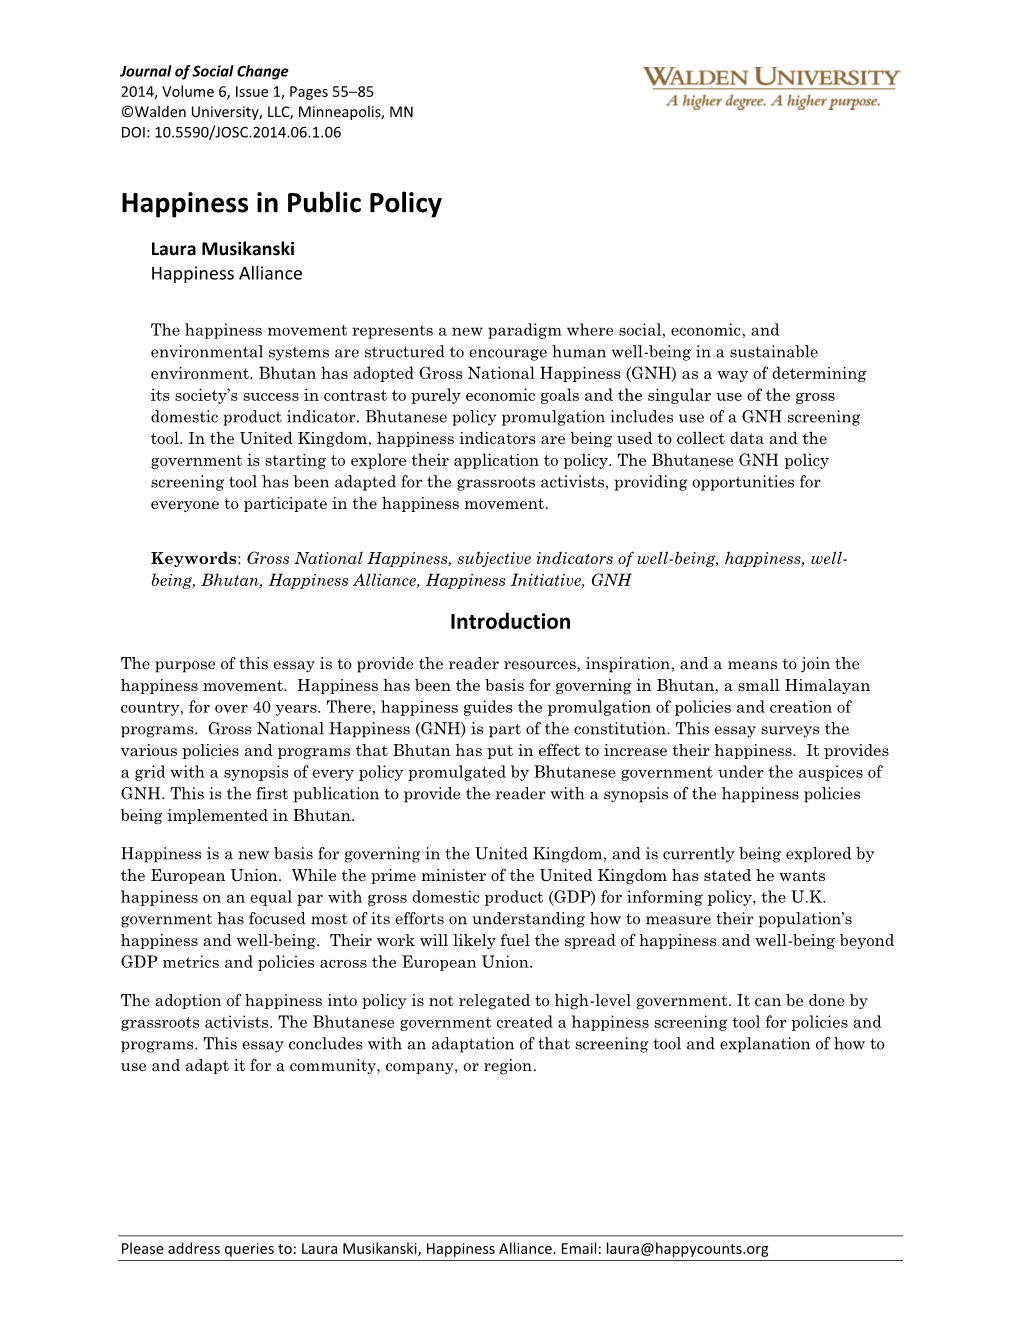 Happiness in Public Policy